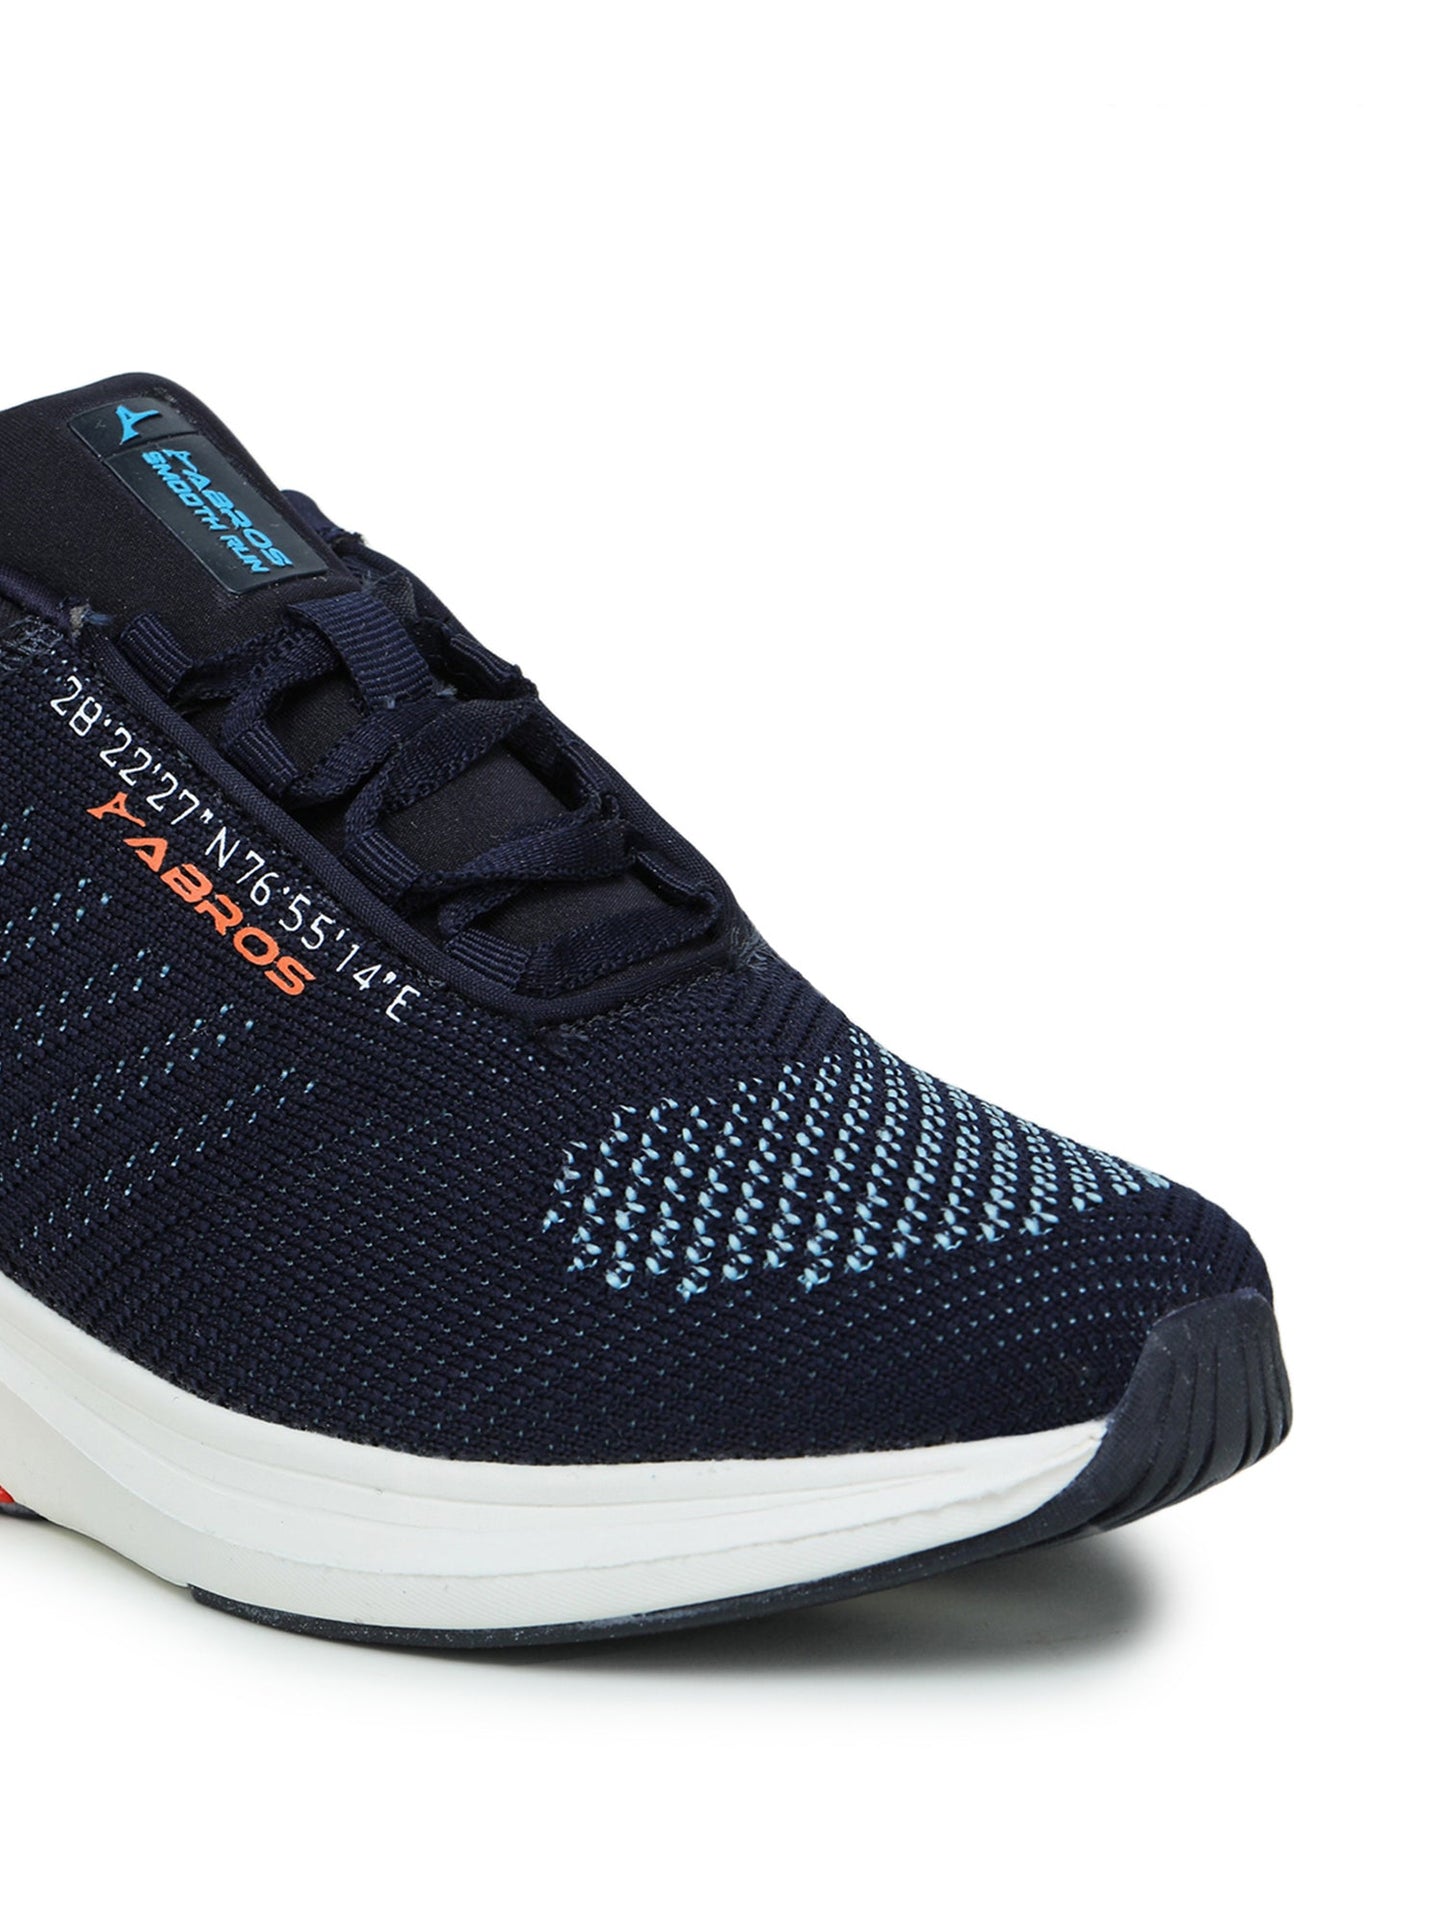 Hyper Sport-Shoes  For Gents